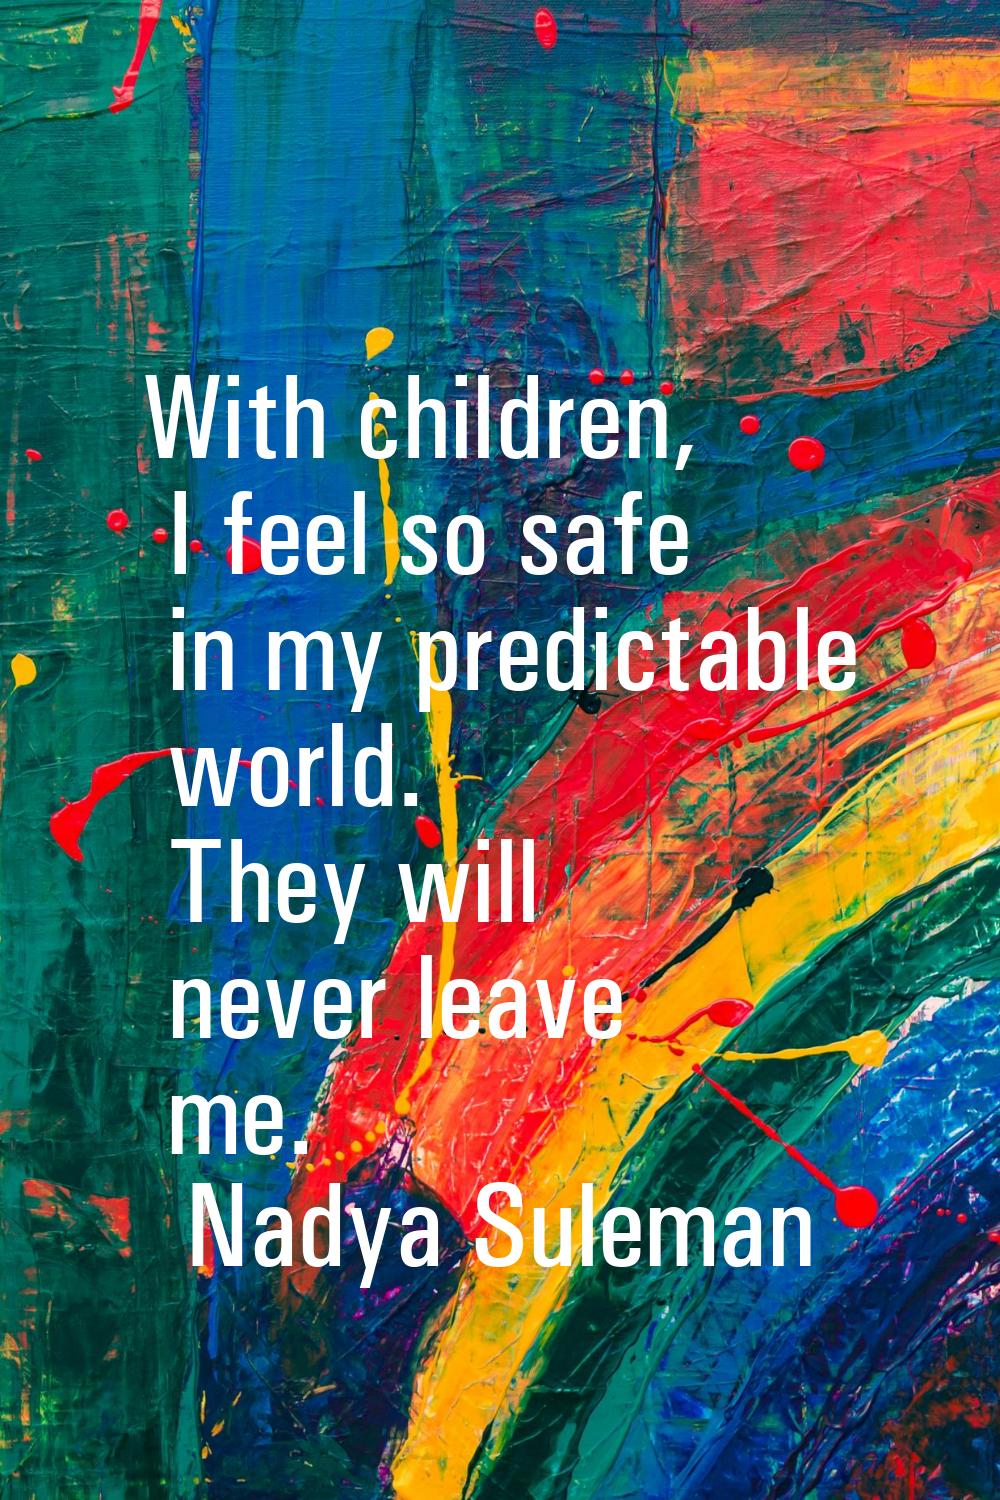 With children, I feel so safe in my predictable world. They will never leave me.